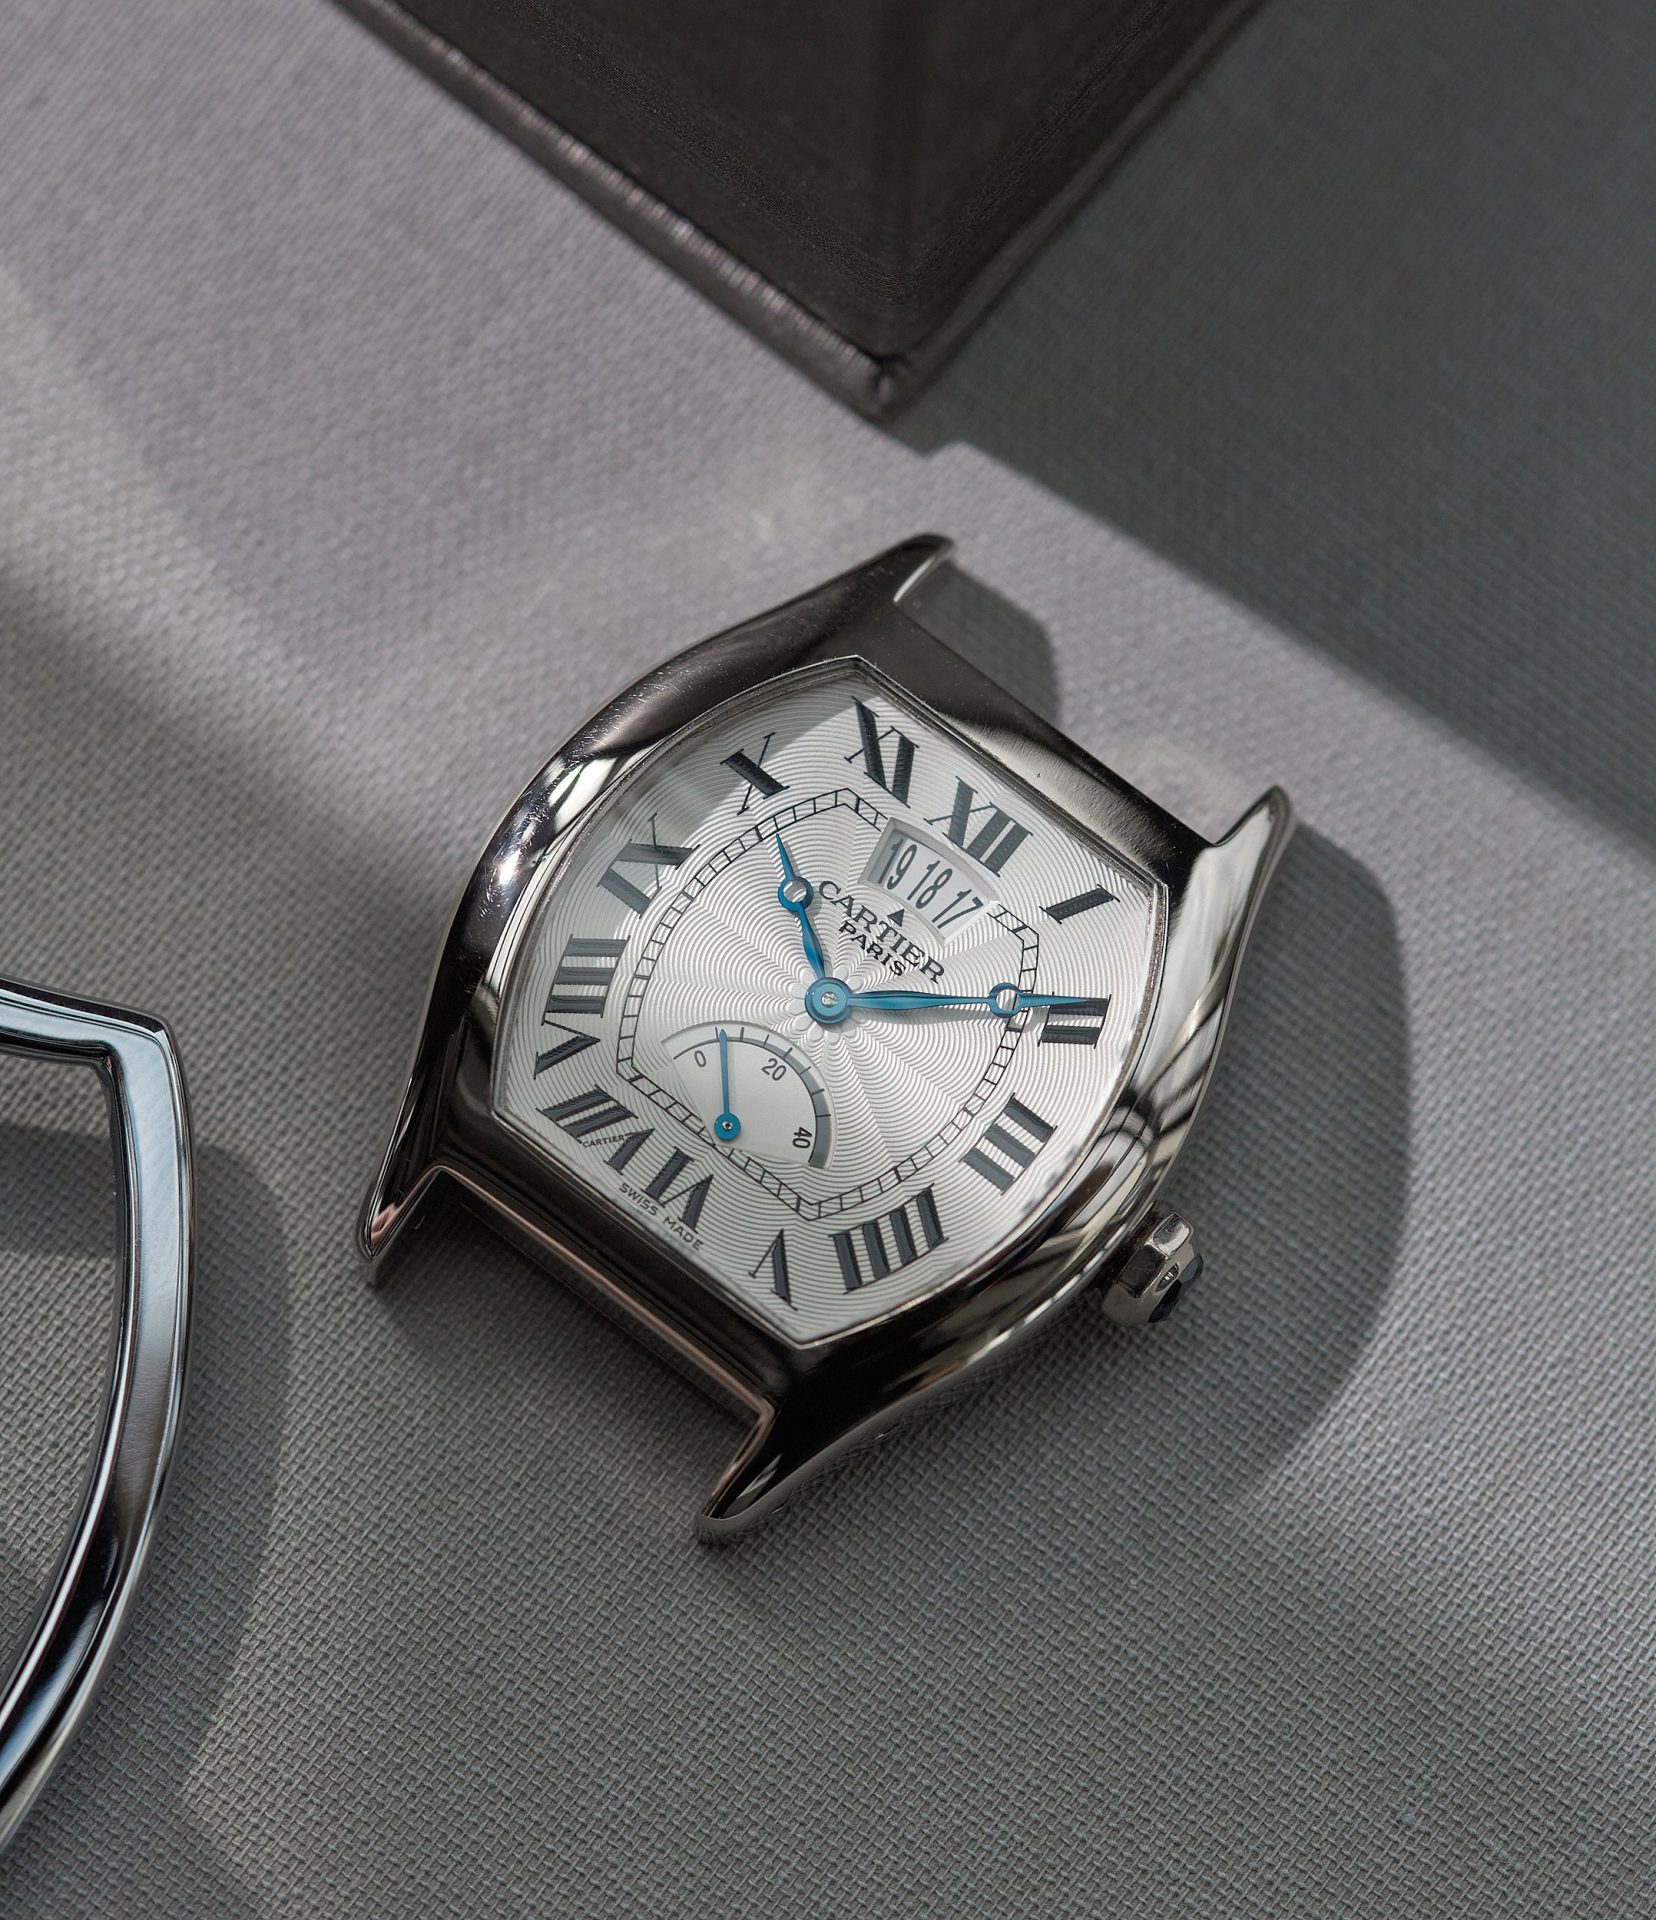 Cartier CPCP white gold Tortue power reserve on table In A Collector’s Guide to the “Collection Privée Cartier Paris” for A Collected Man London